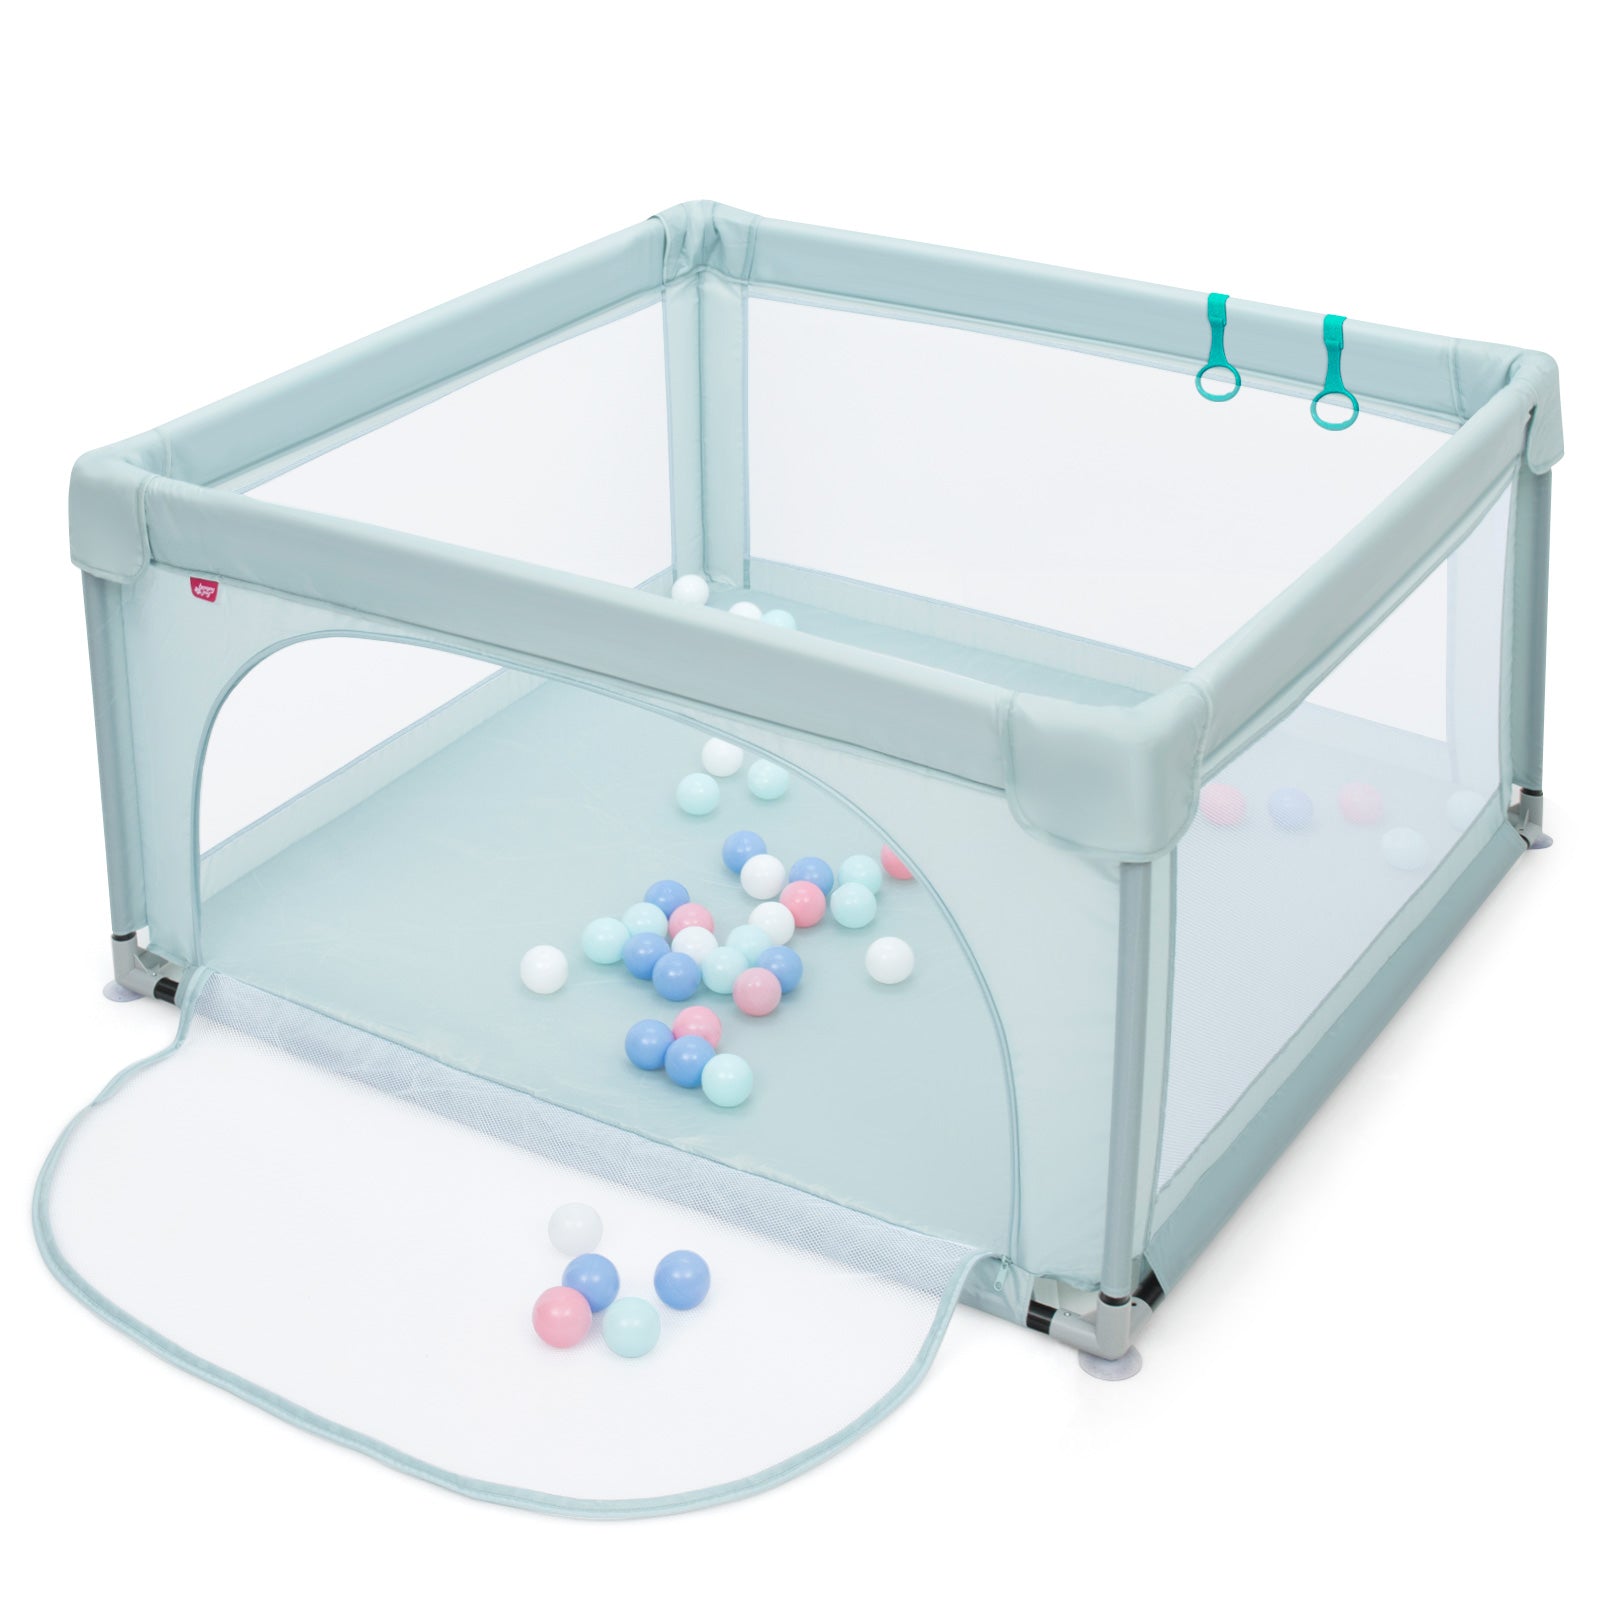 Baby Playpen Safety Activity Fence with Ocean Balls for Toddlers-Blue